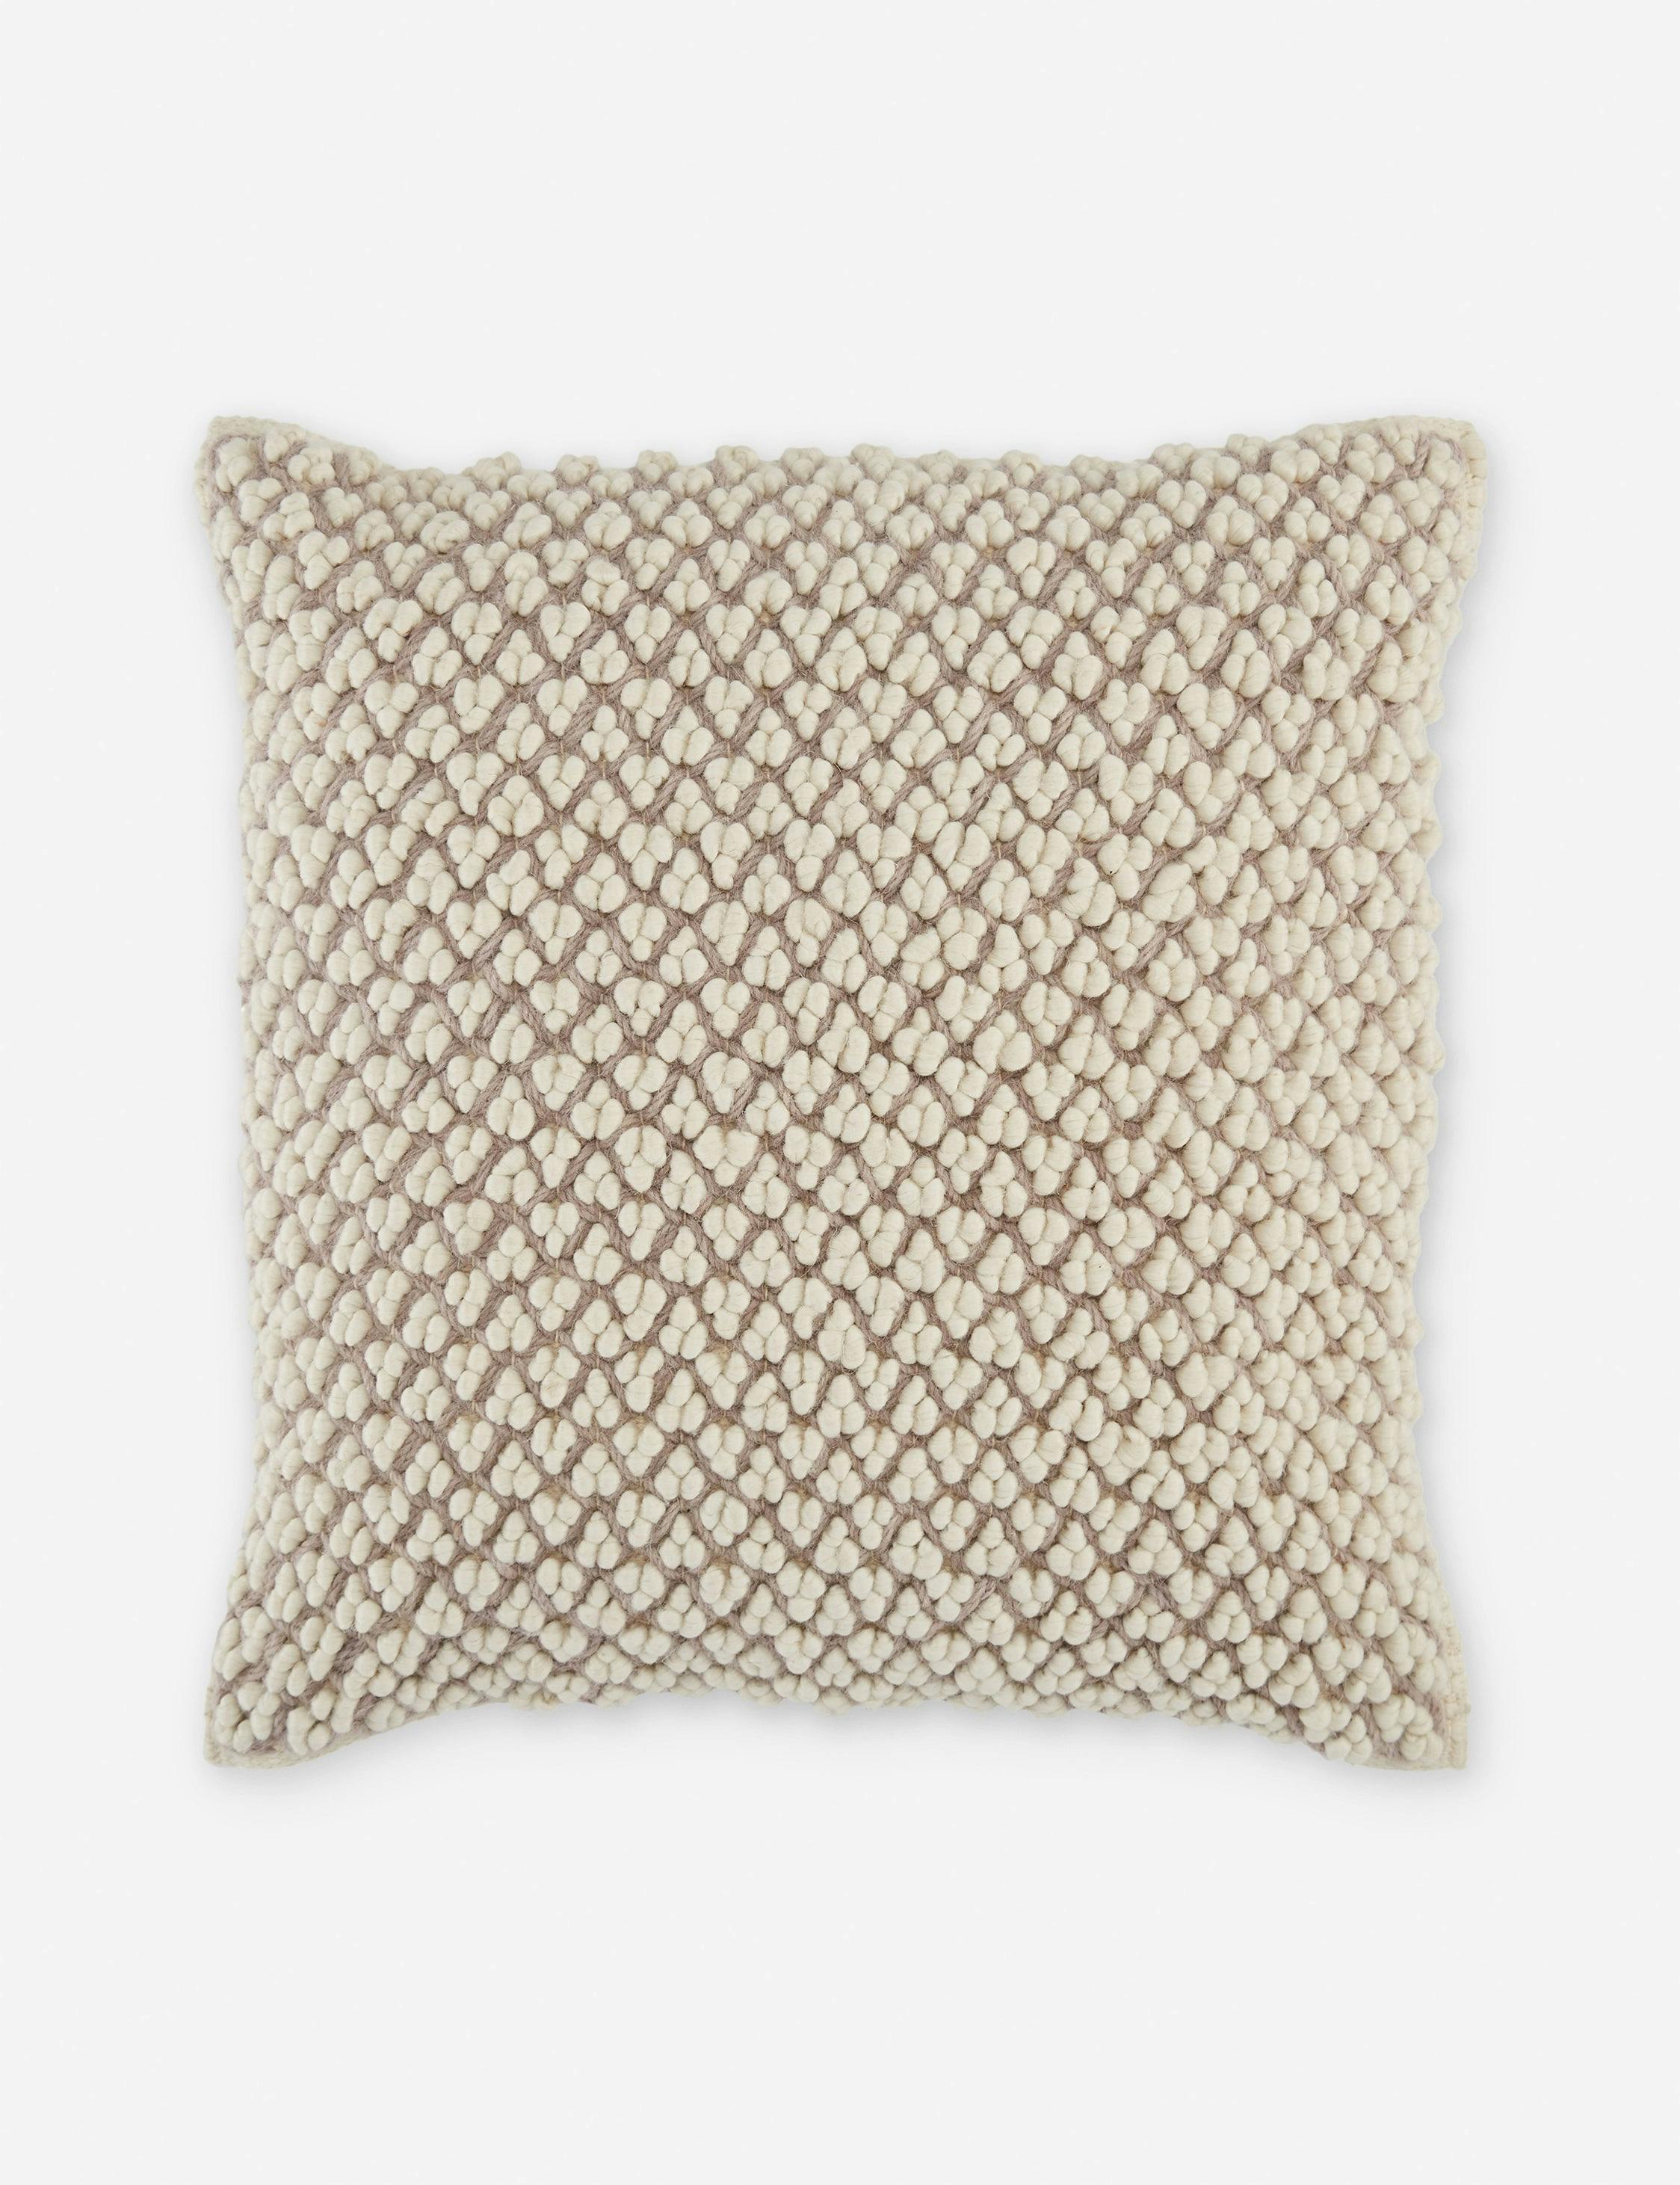 Madur Square Embroidered Taupe & Ivory Boucle Throw Pillow 22"